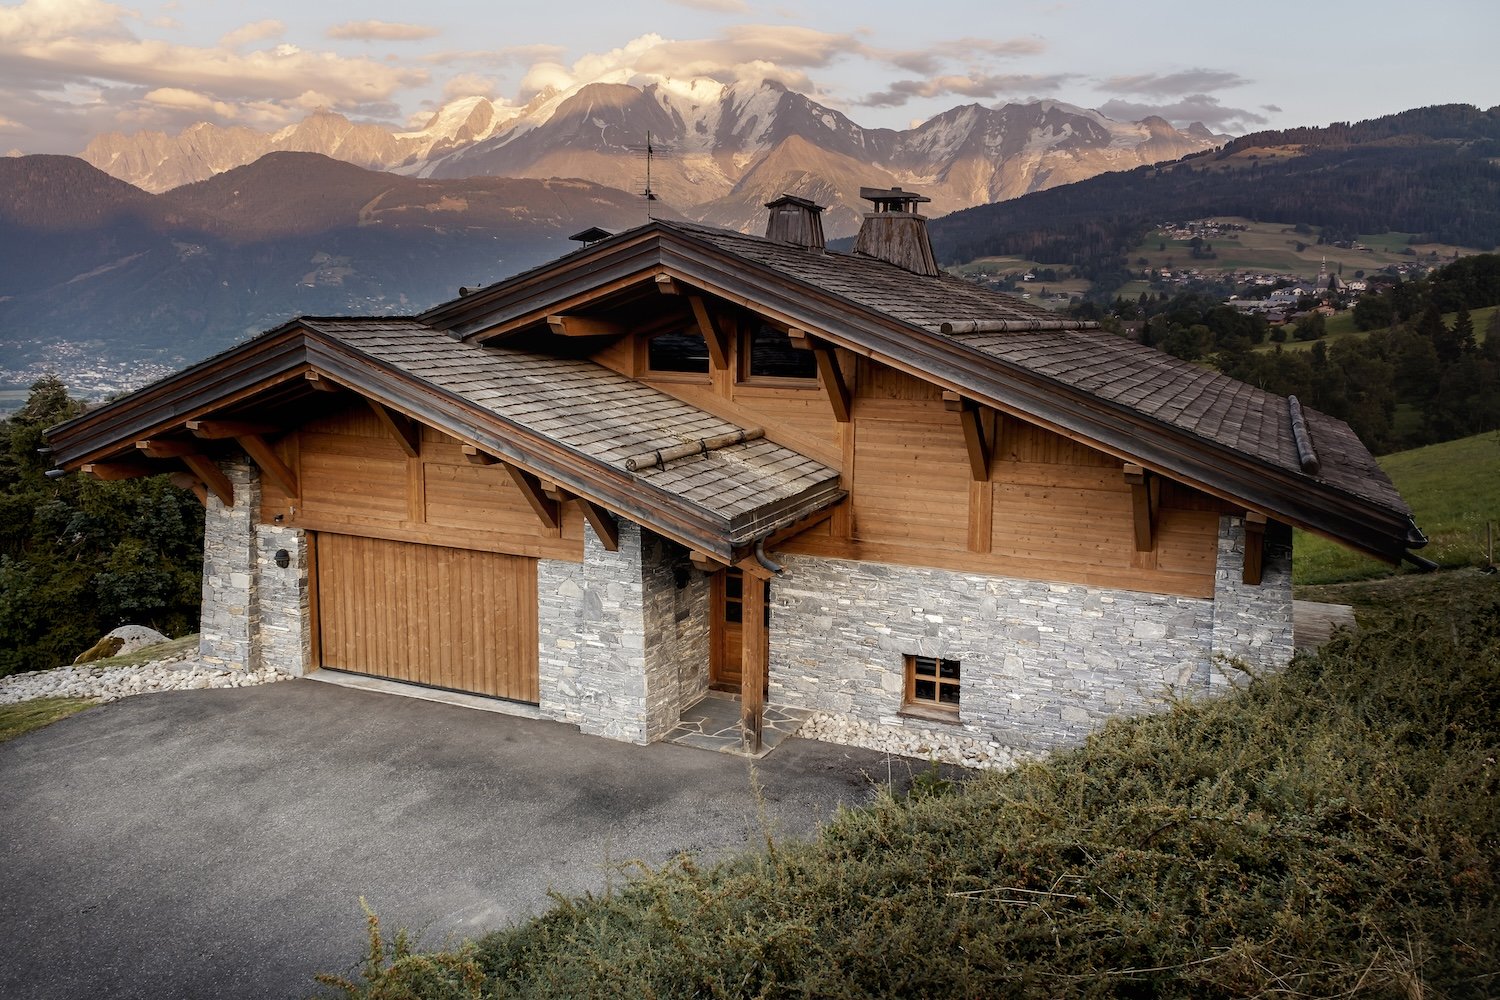 Francis+York+Discover This Luxury Chalet in the French Alps From The August Premium Collection 00043.jpg